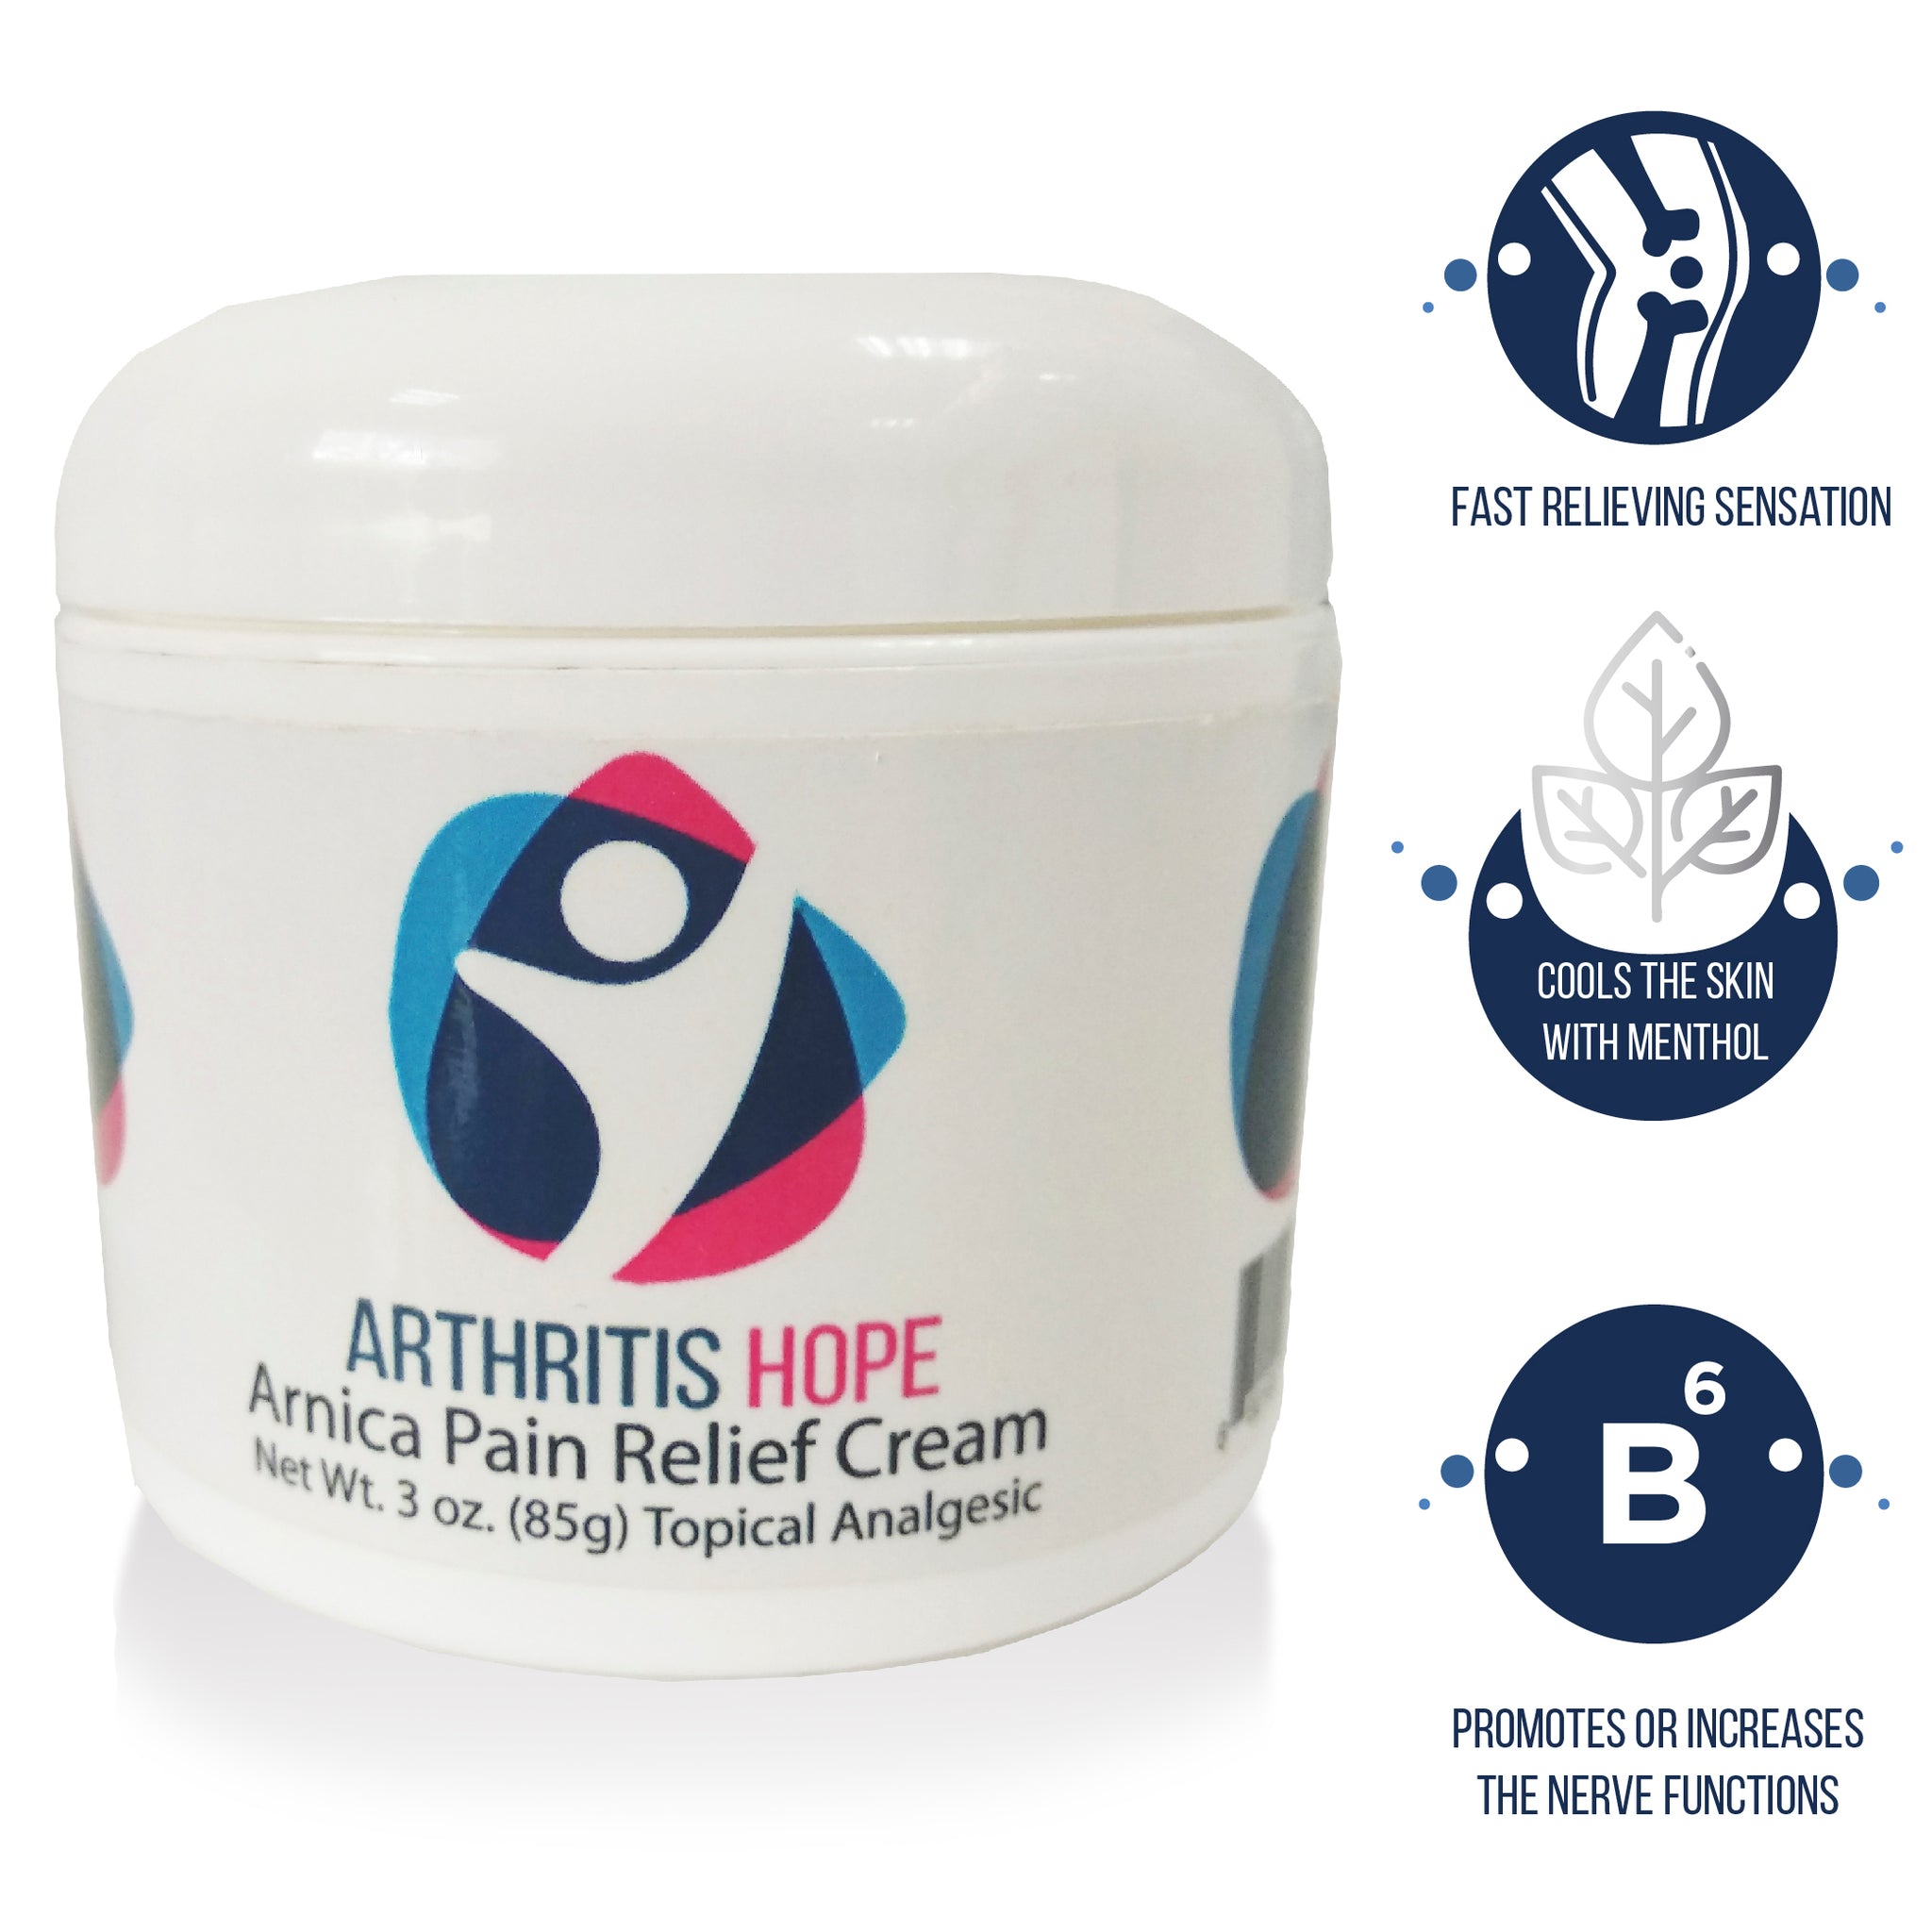 ArthritisHope's Cream for Joint Relief